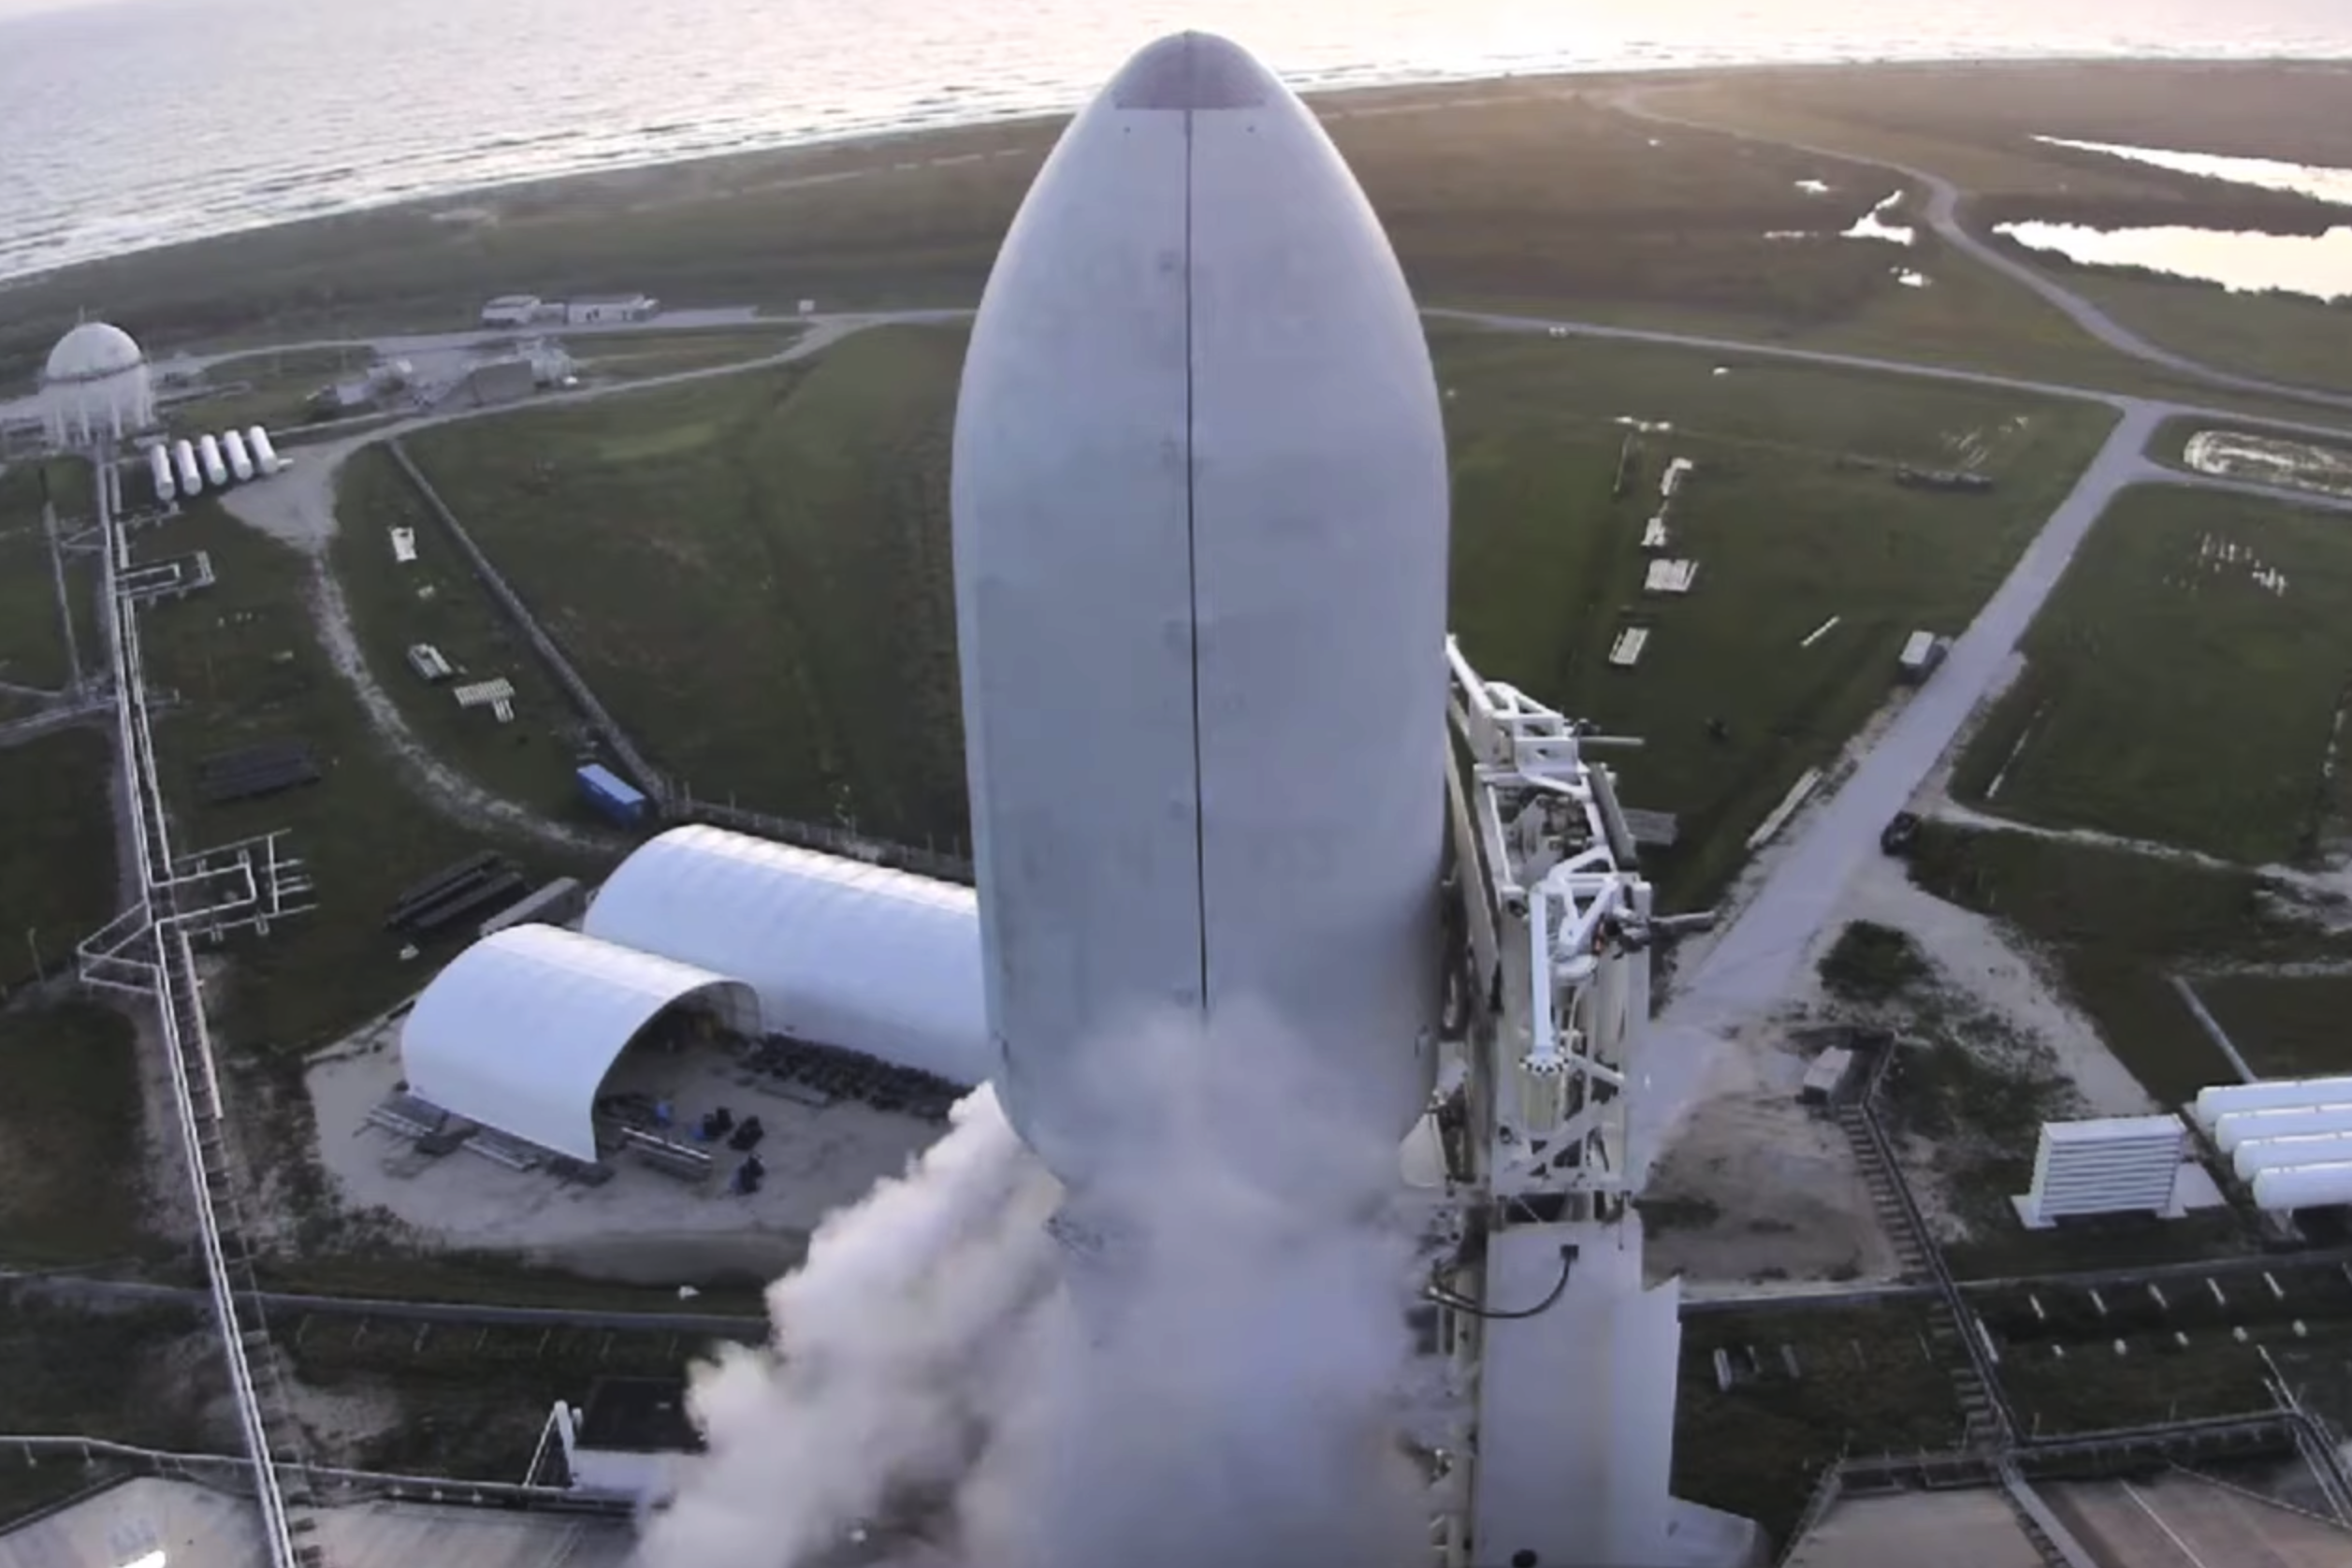 How to watch SpaceX’s nighttime Starlink launch tonight